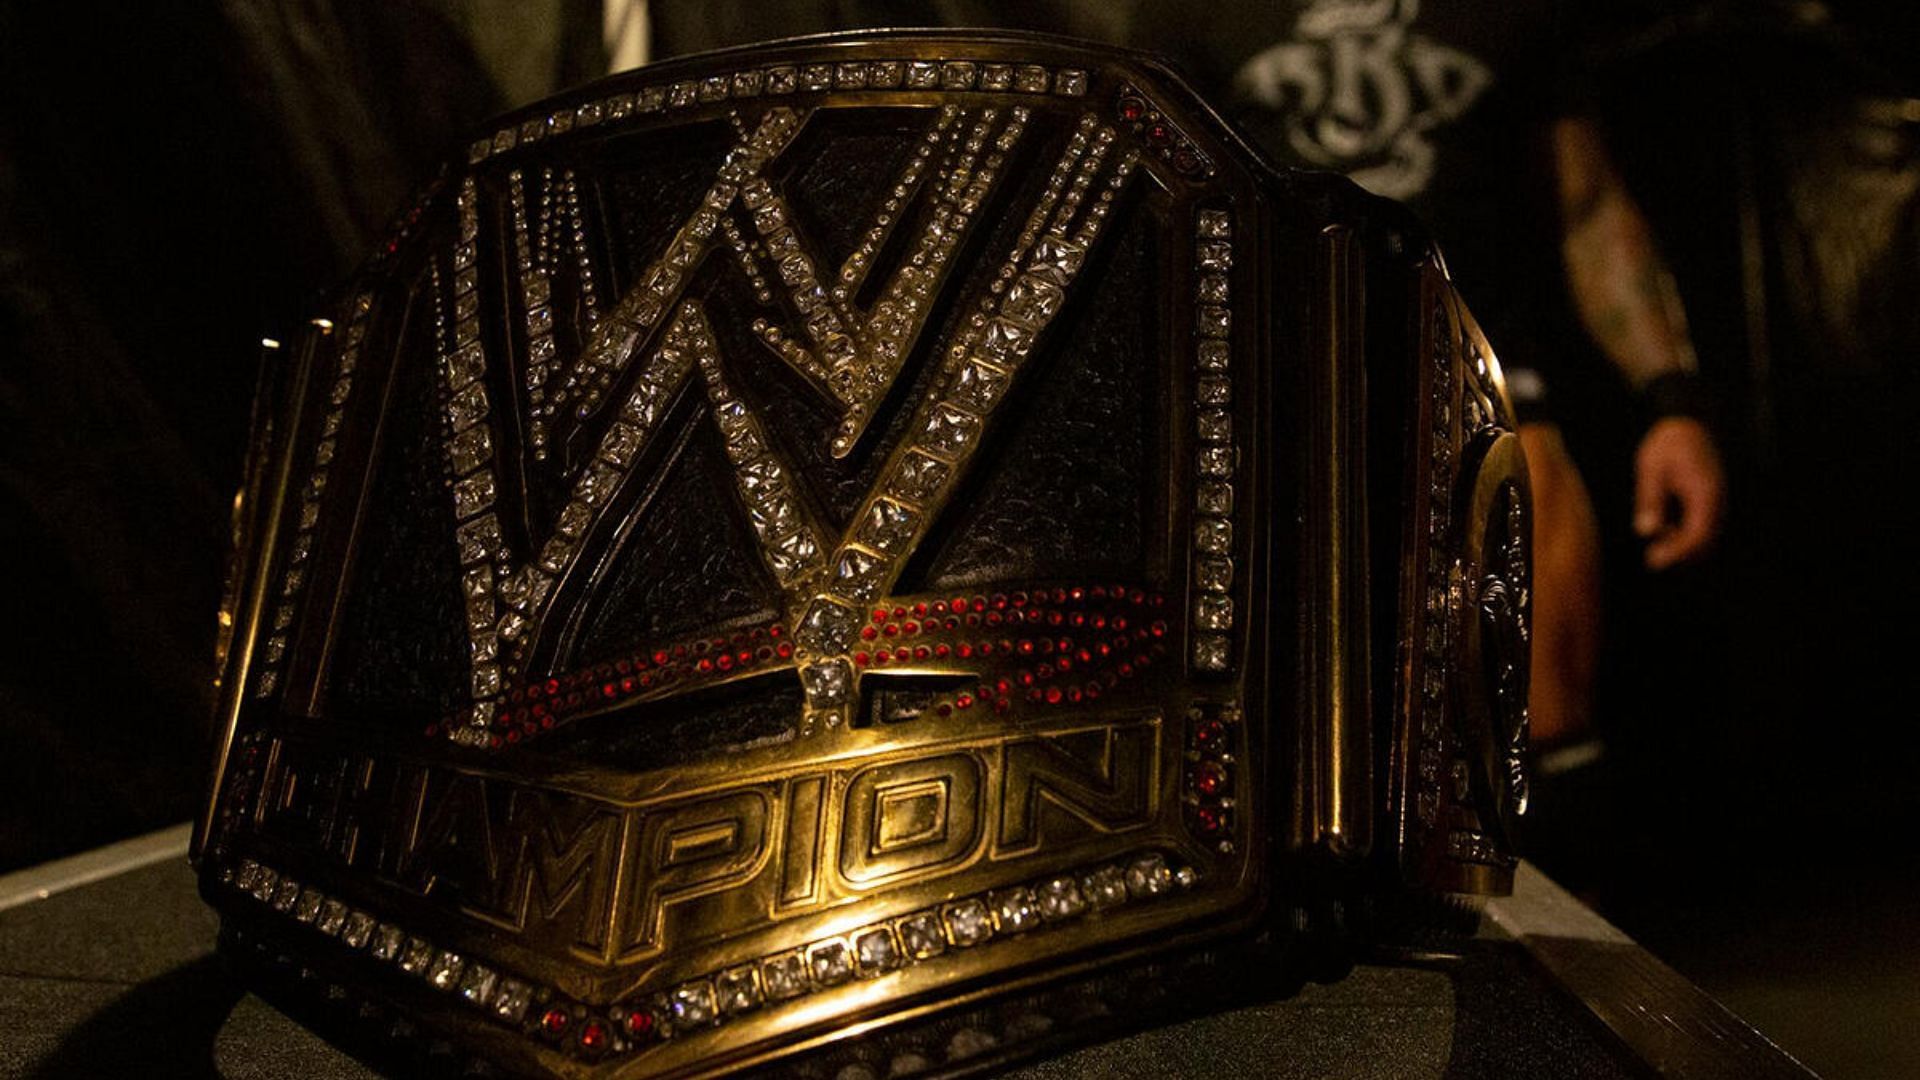 The oldest belt in WWE with the vintage logo (Credit: WWE)